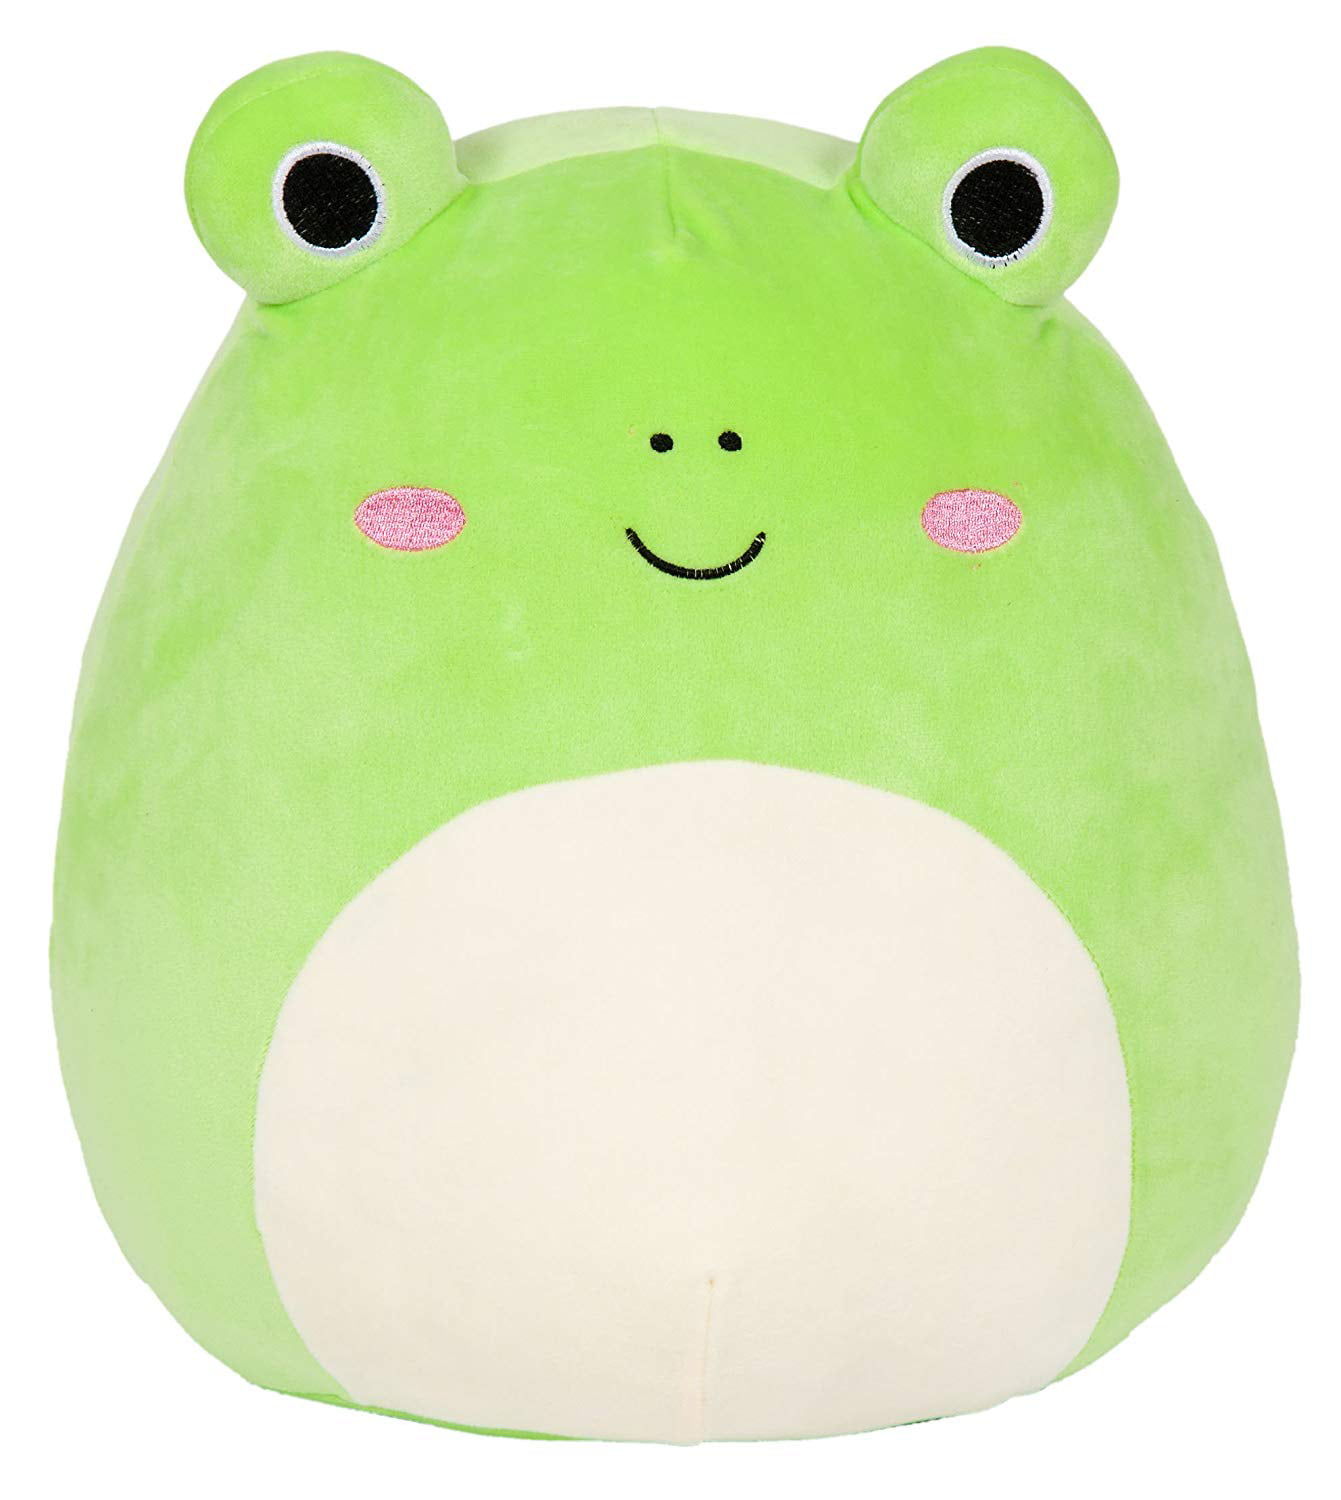 Squishmallows Wendy The Frog 16 inch Plush Toy Stuffed Animal Free Shipping USA 